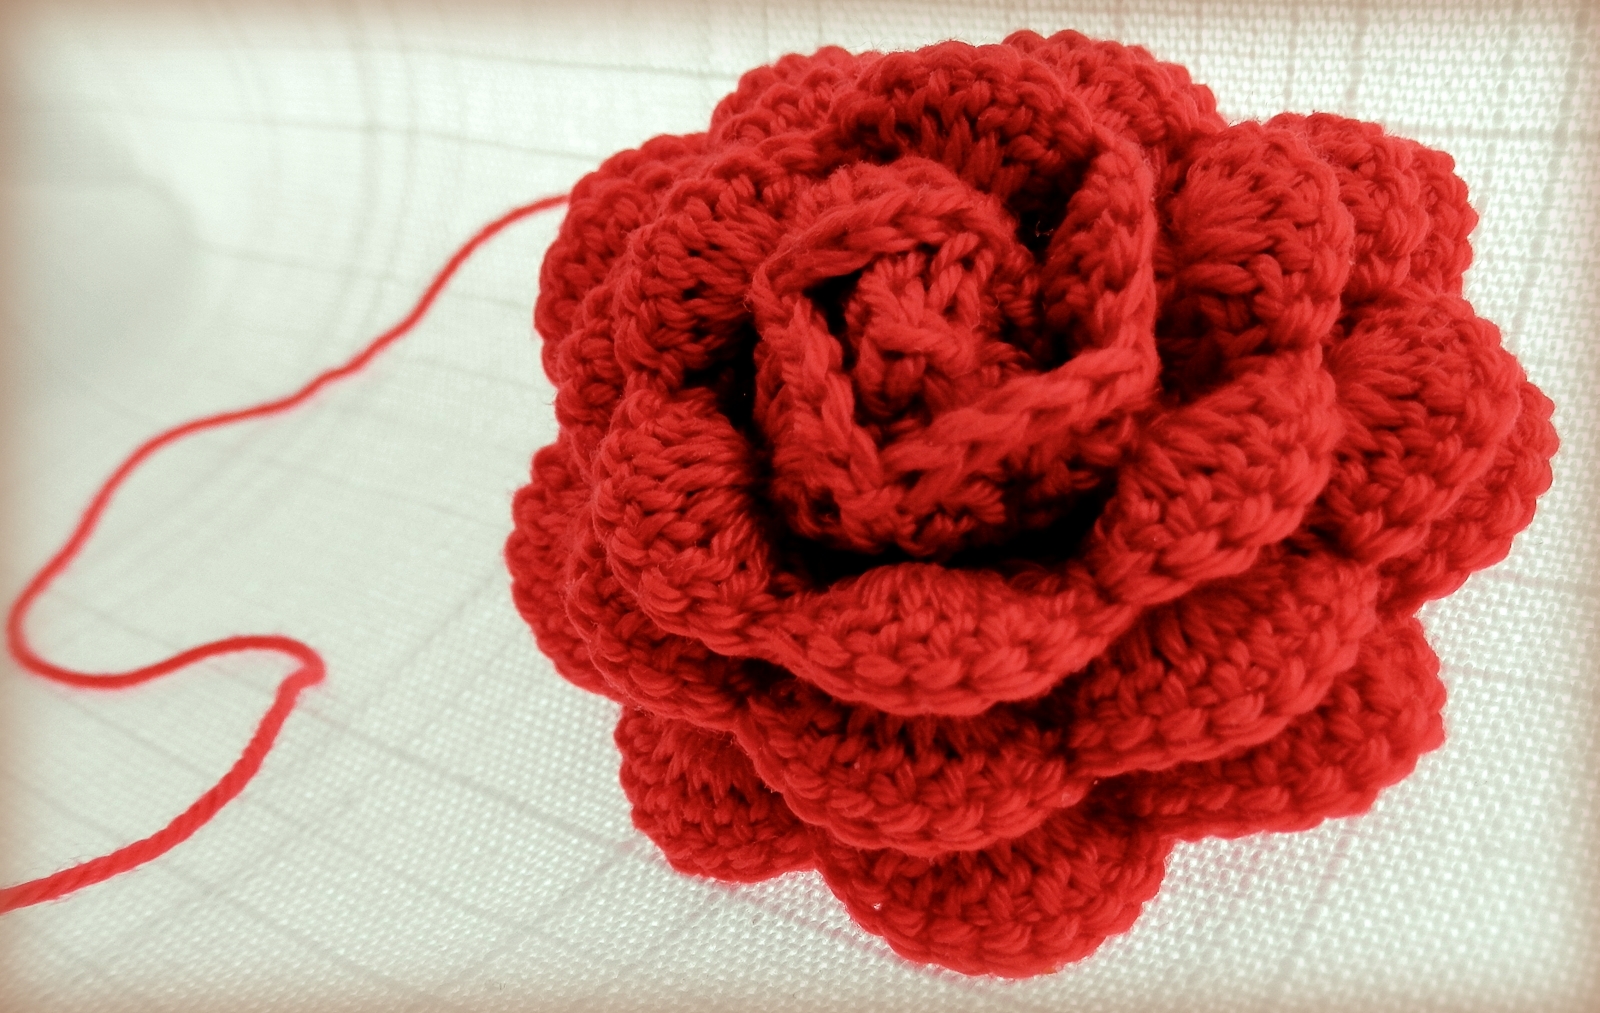 Crochet Roses Free Pattern And Video Tutorial Your Crochet | My XXX Hot ...